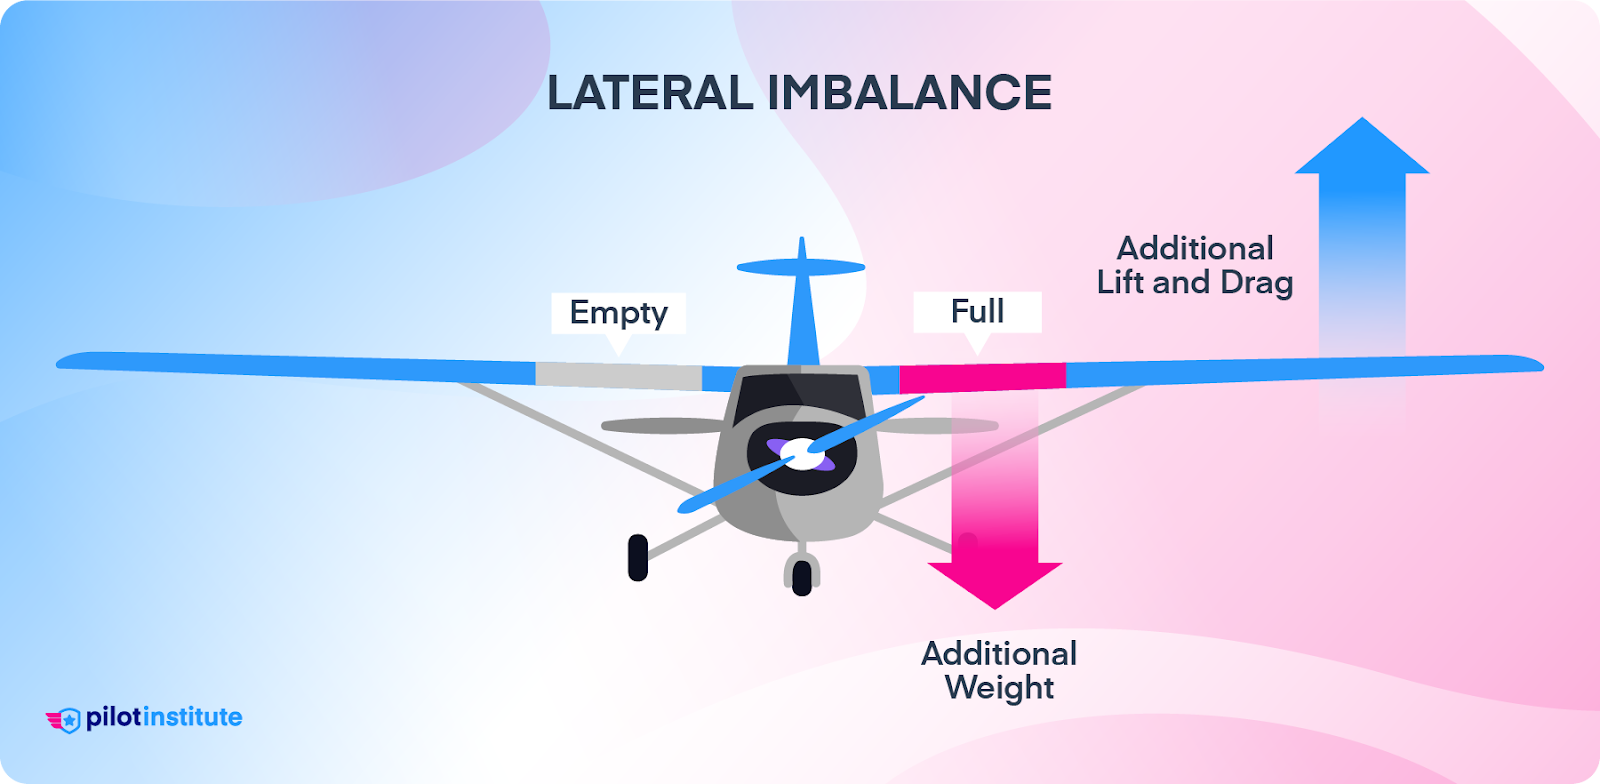 Differences between left and right-side fuel tank levels creates lateral imbalance. 